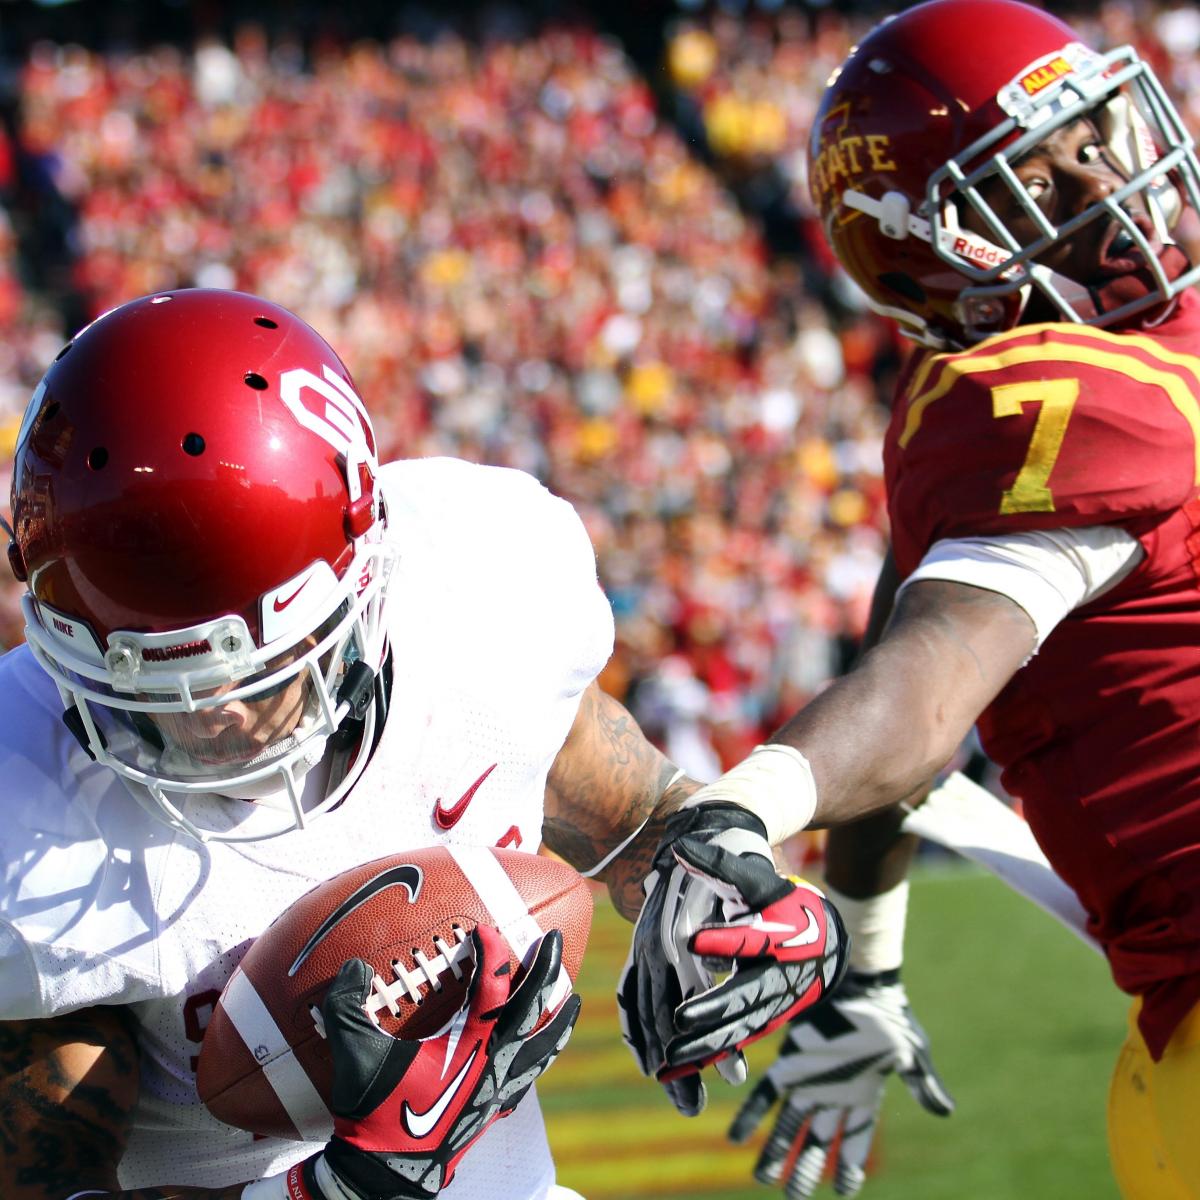 Iowa State vs. Oklahoma TV Info, Spread, Injury Updates, Game Time and